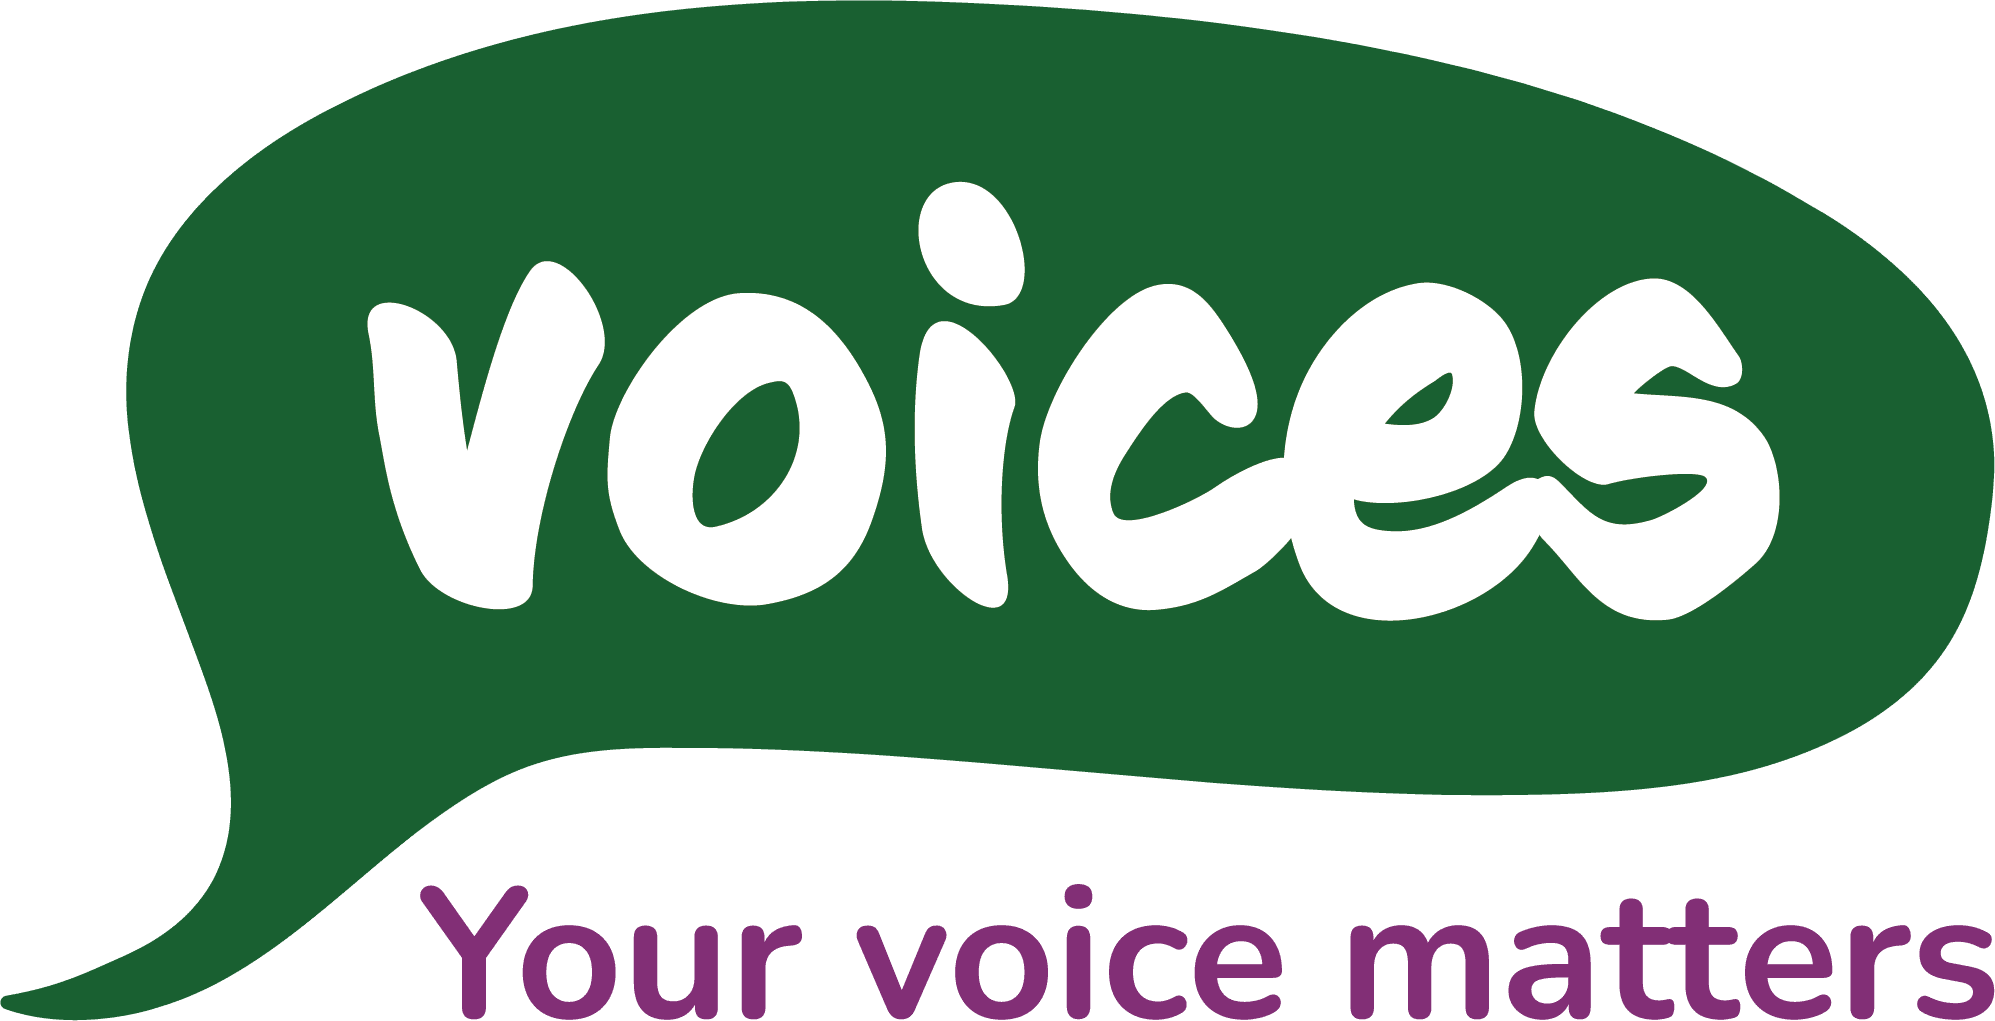 VOICES Logo_Use on light Backgrounds